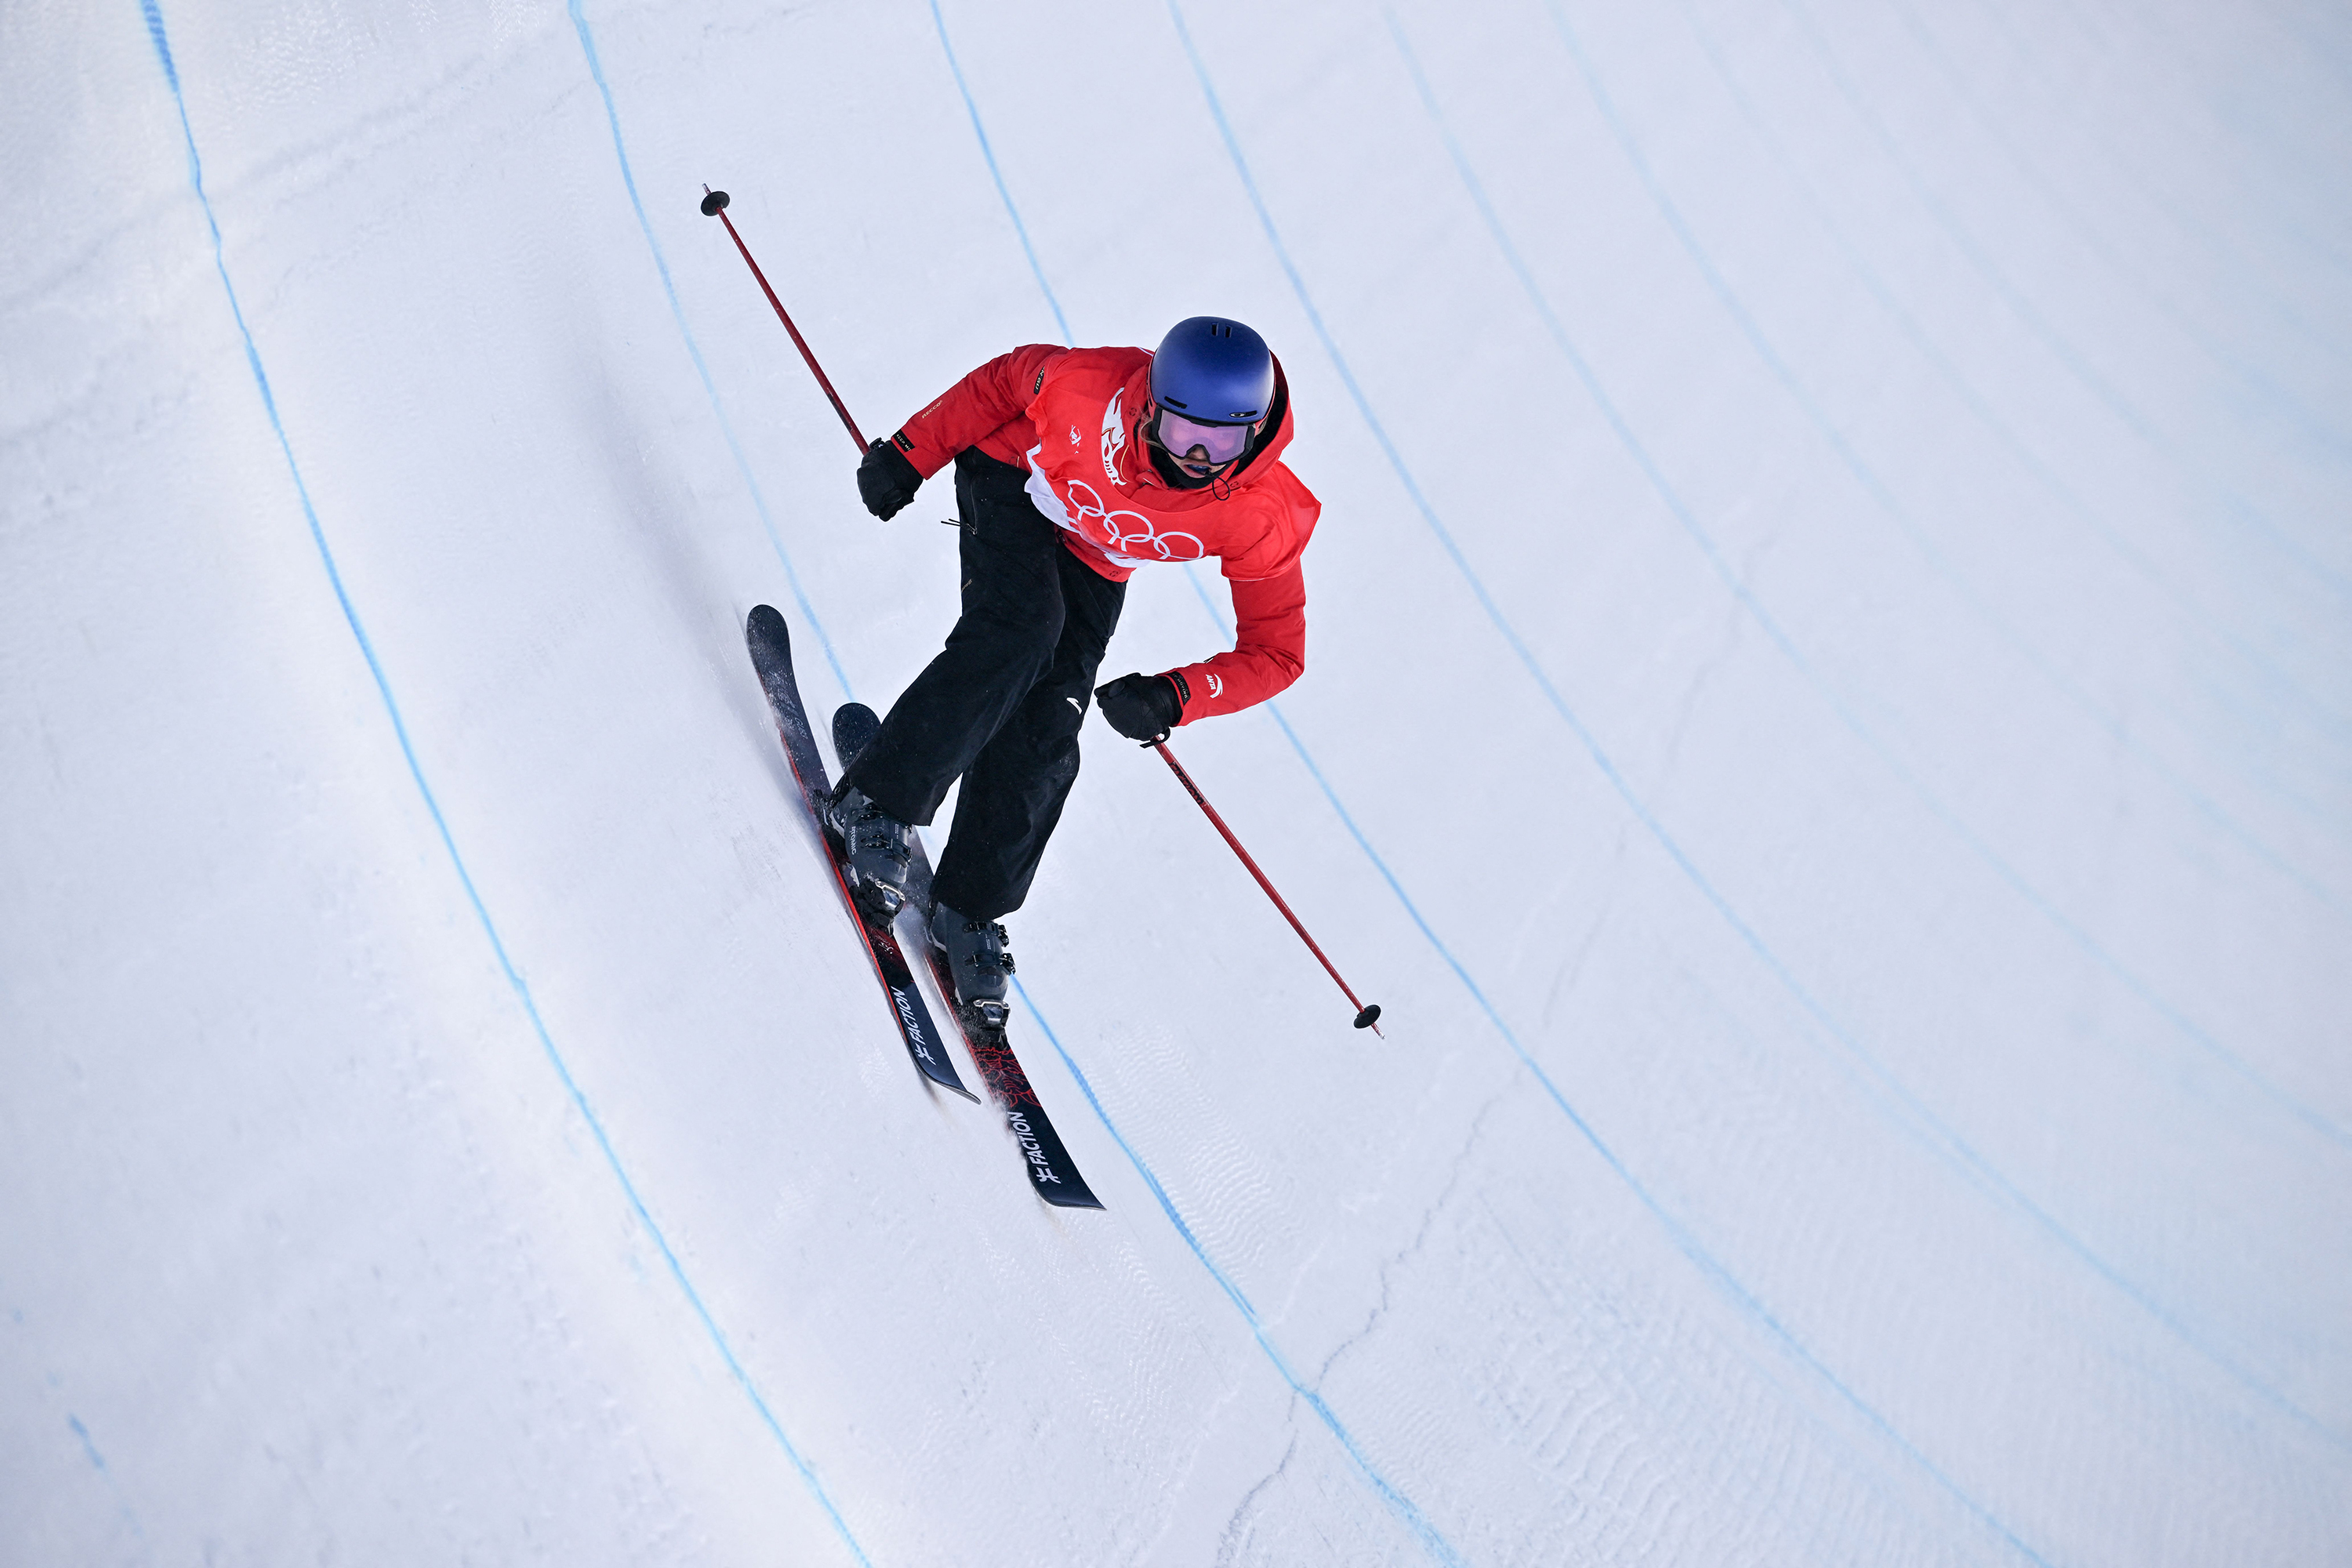 China's Eileen Gu competes in the freestyle skiing women's freeski halfpipe final run on Friday.